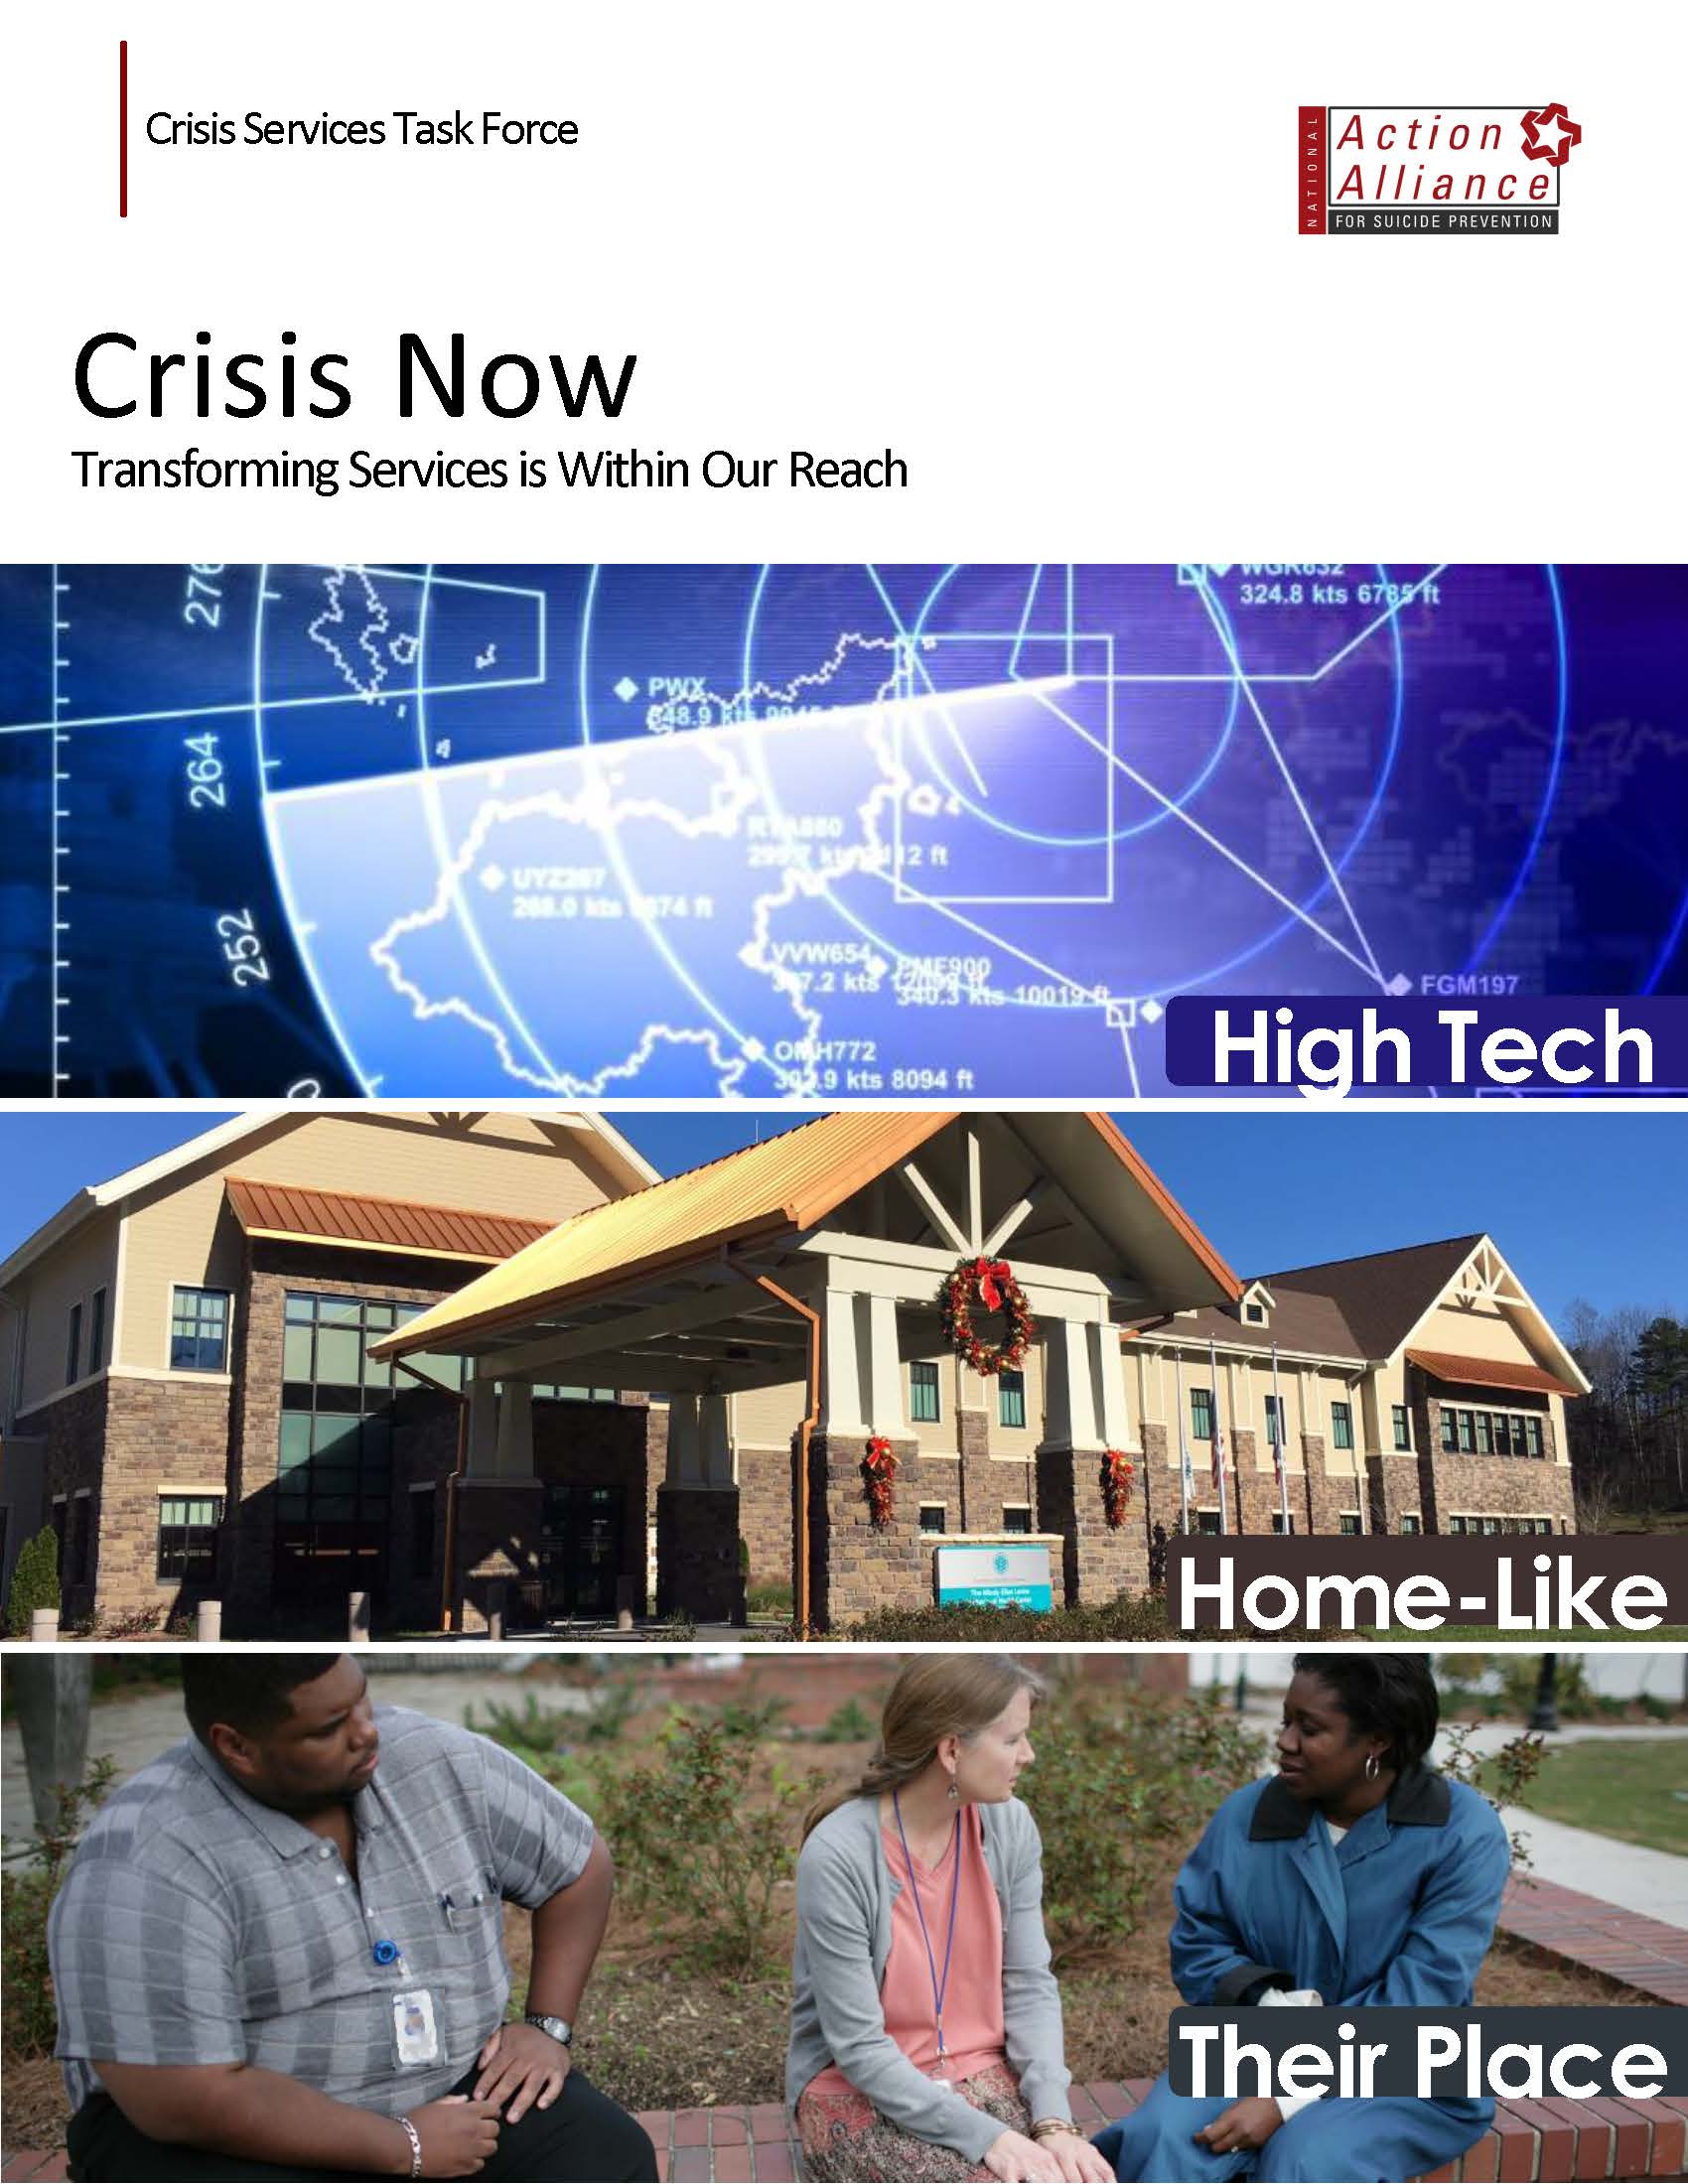 Crisis Now: Transforming Services is Within Our Reach